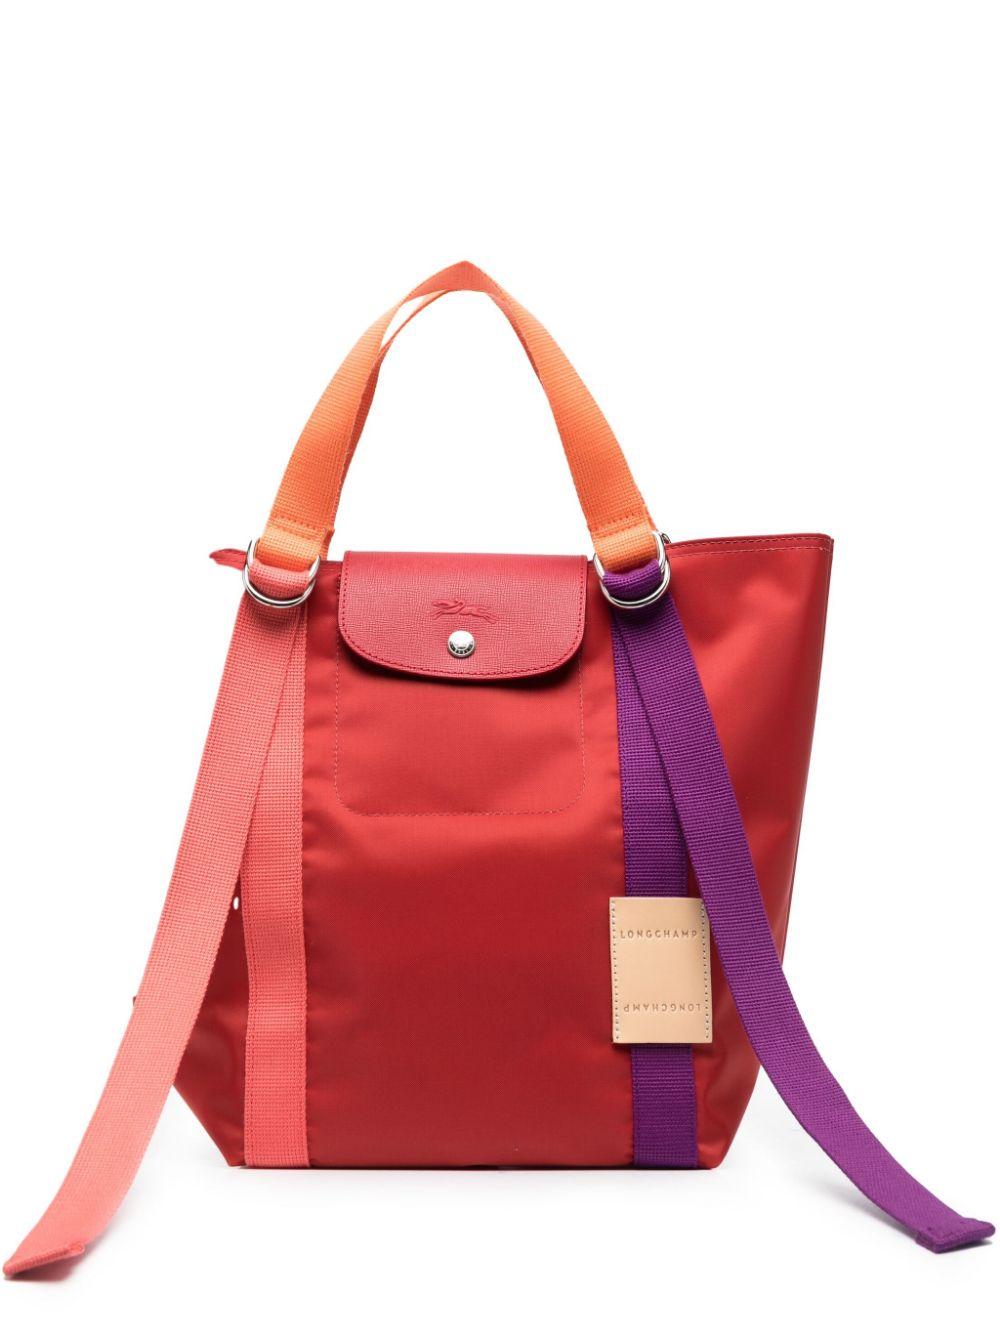 Longchamp Le Pliage Re-play Tote Bag in Red | Lyst